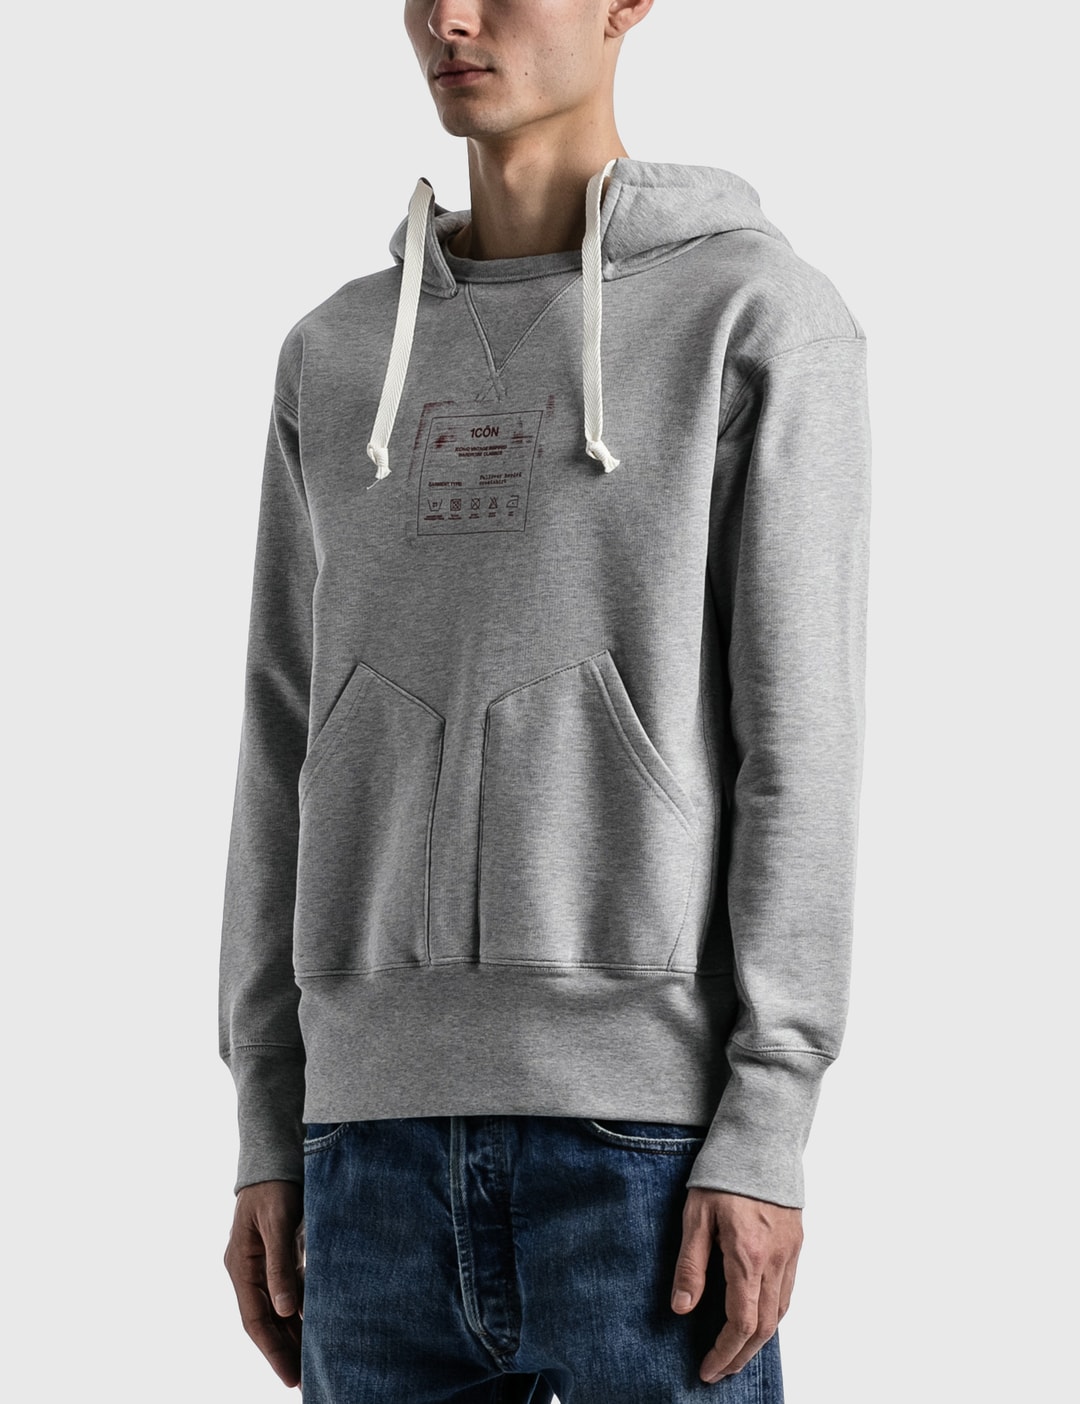 Maison Margiela - Label Printed Hoodie | HBX - Globally Curated Fashion ...